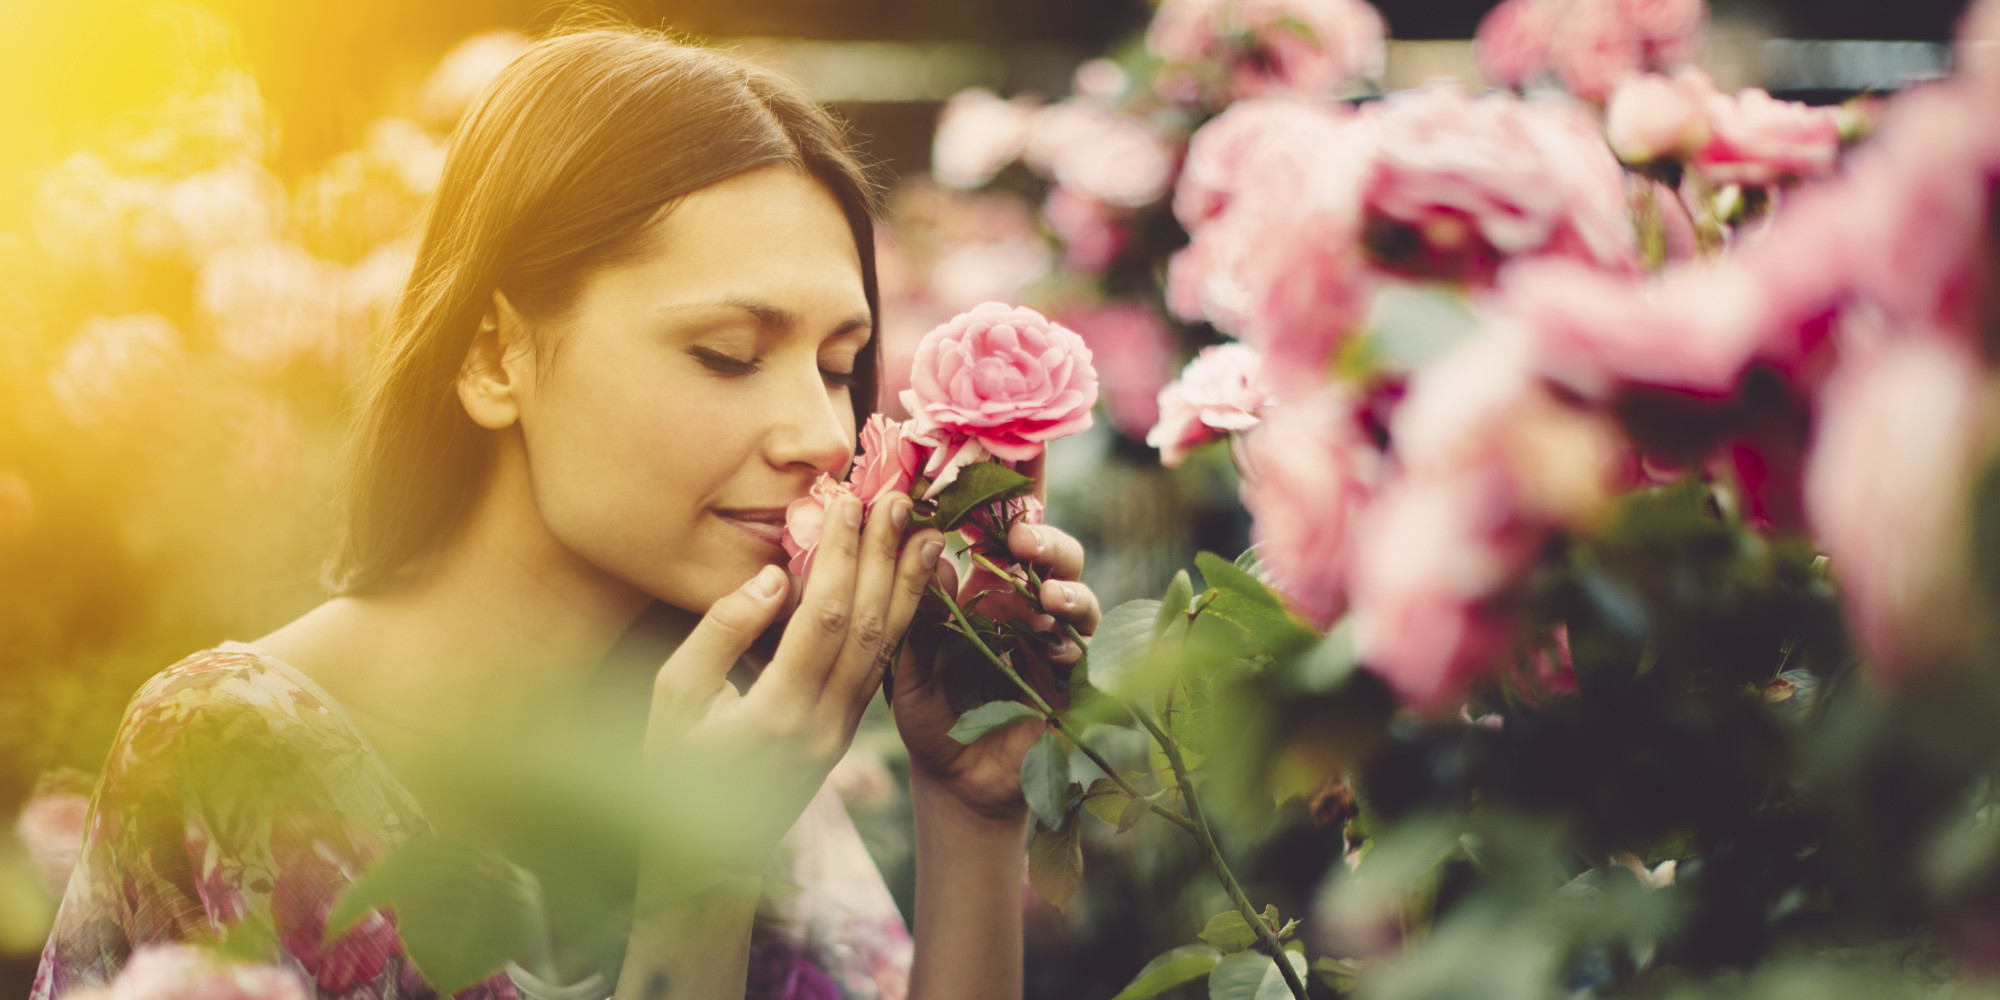 Free photo: Smelling the flowers - Blond, Face, Female - Free Download